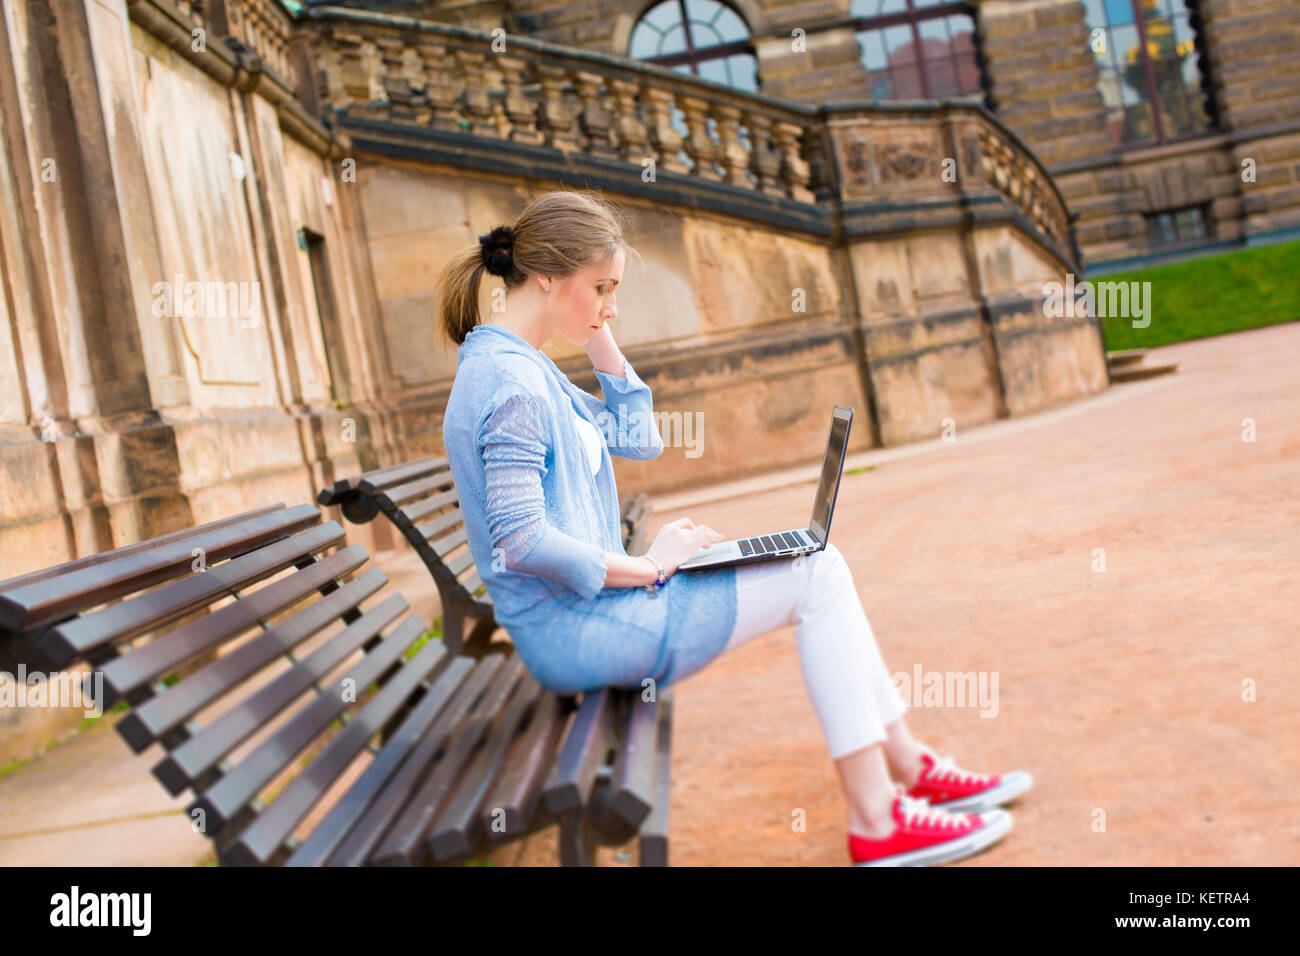 Young female student with a laptop in a city park on a bench Stock Photo